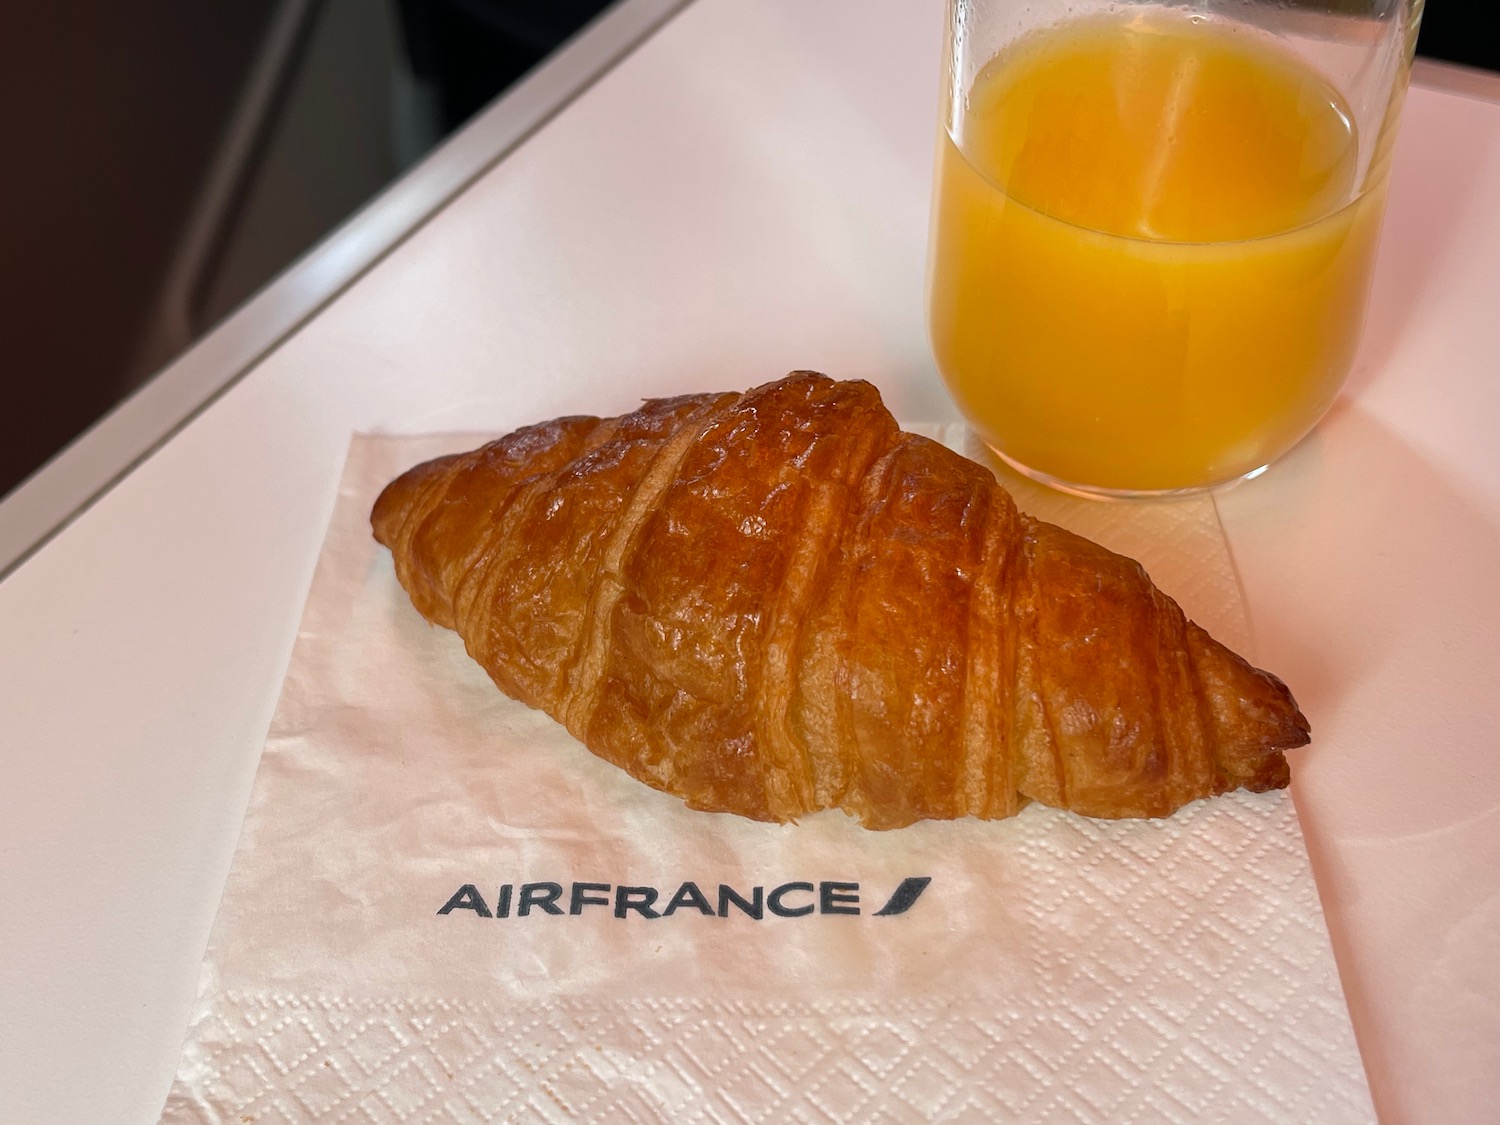 a croissant and a glass of orange juice on a napkin